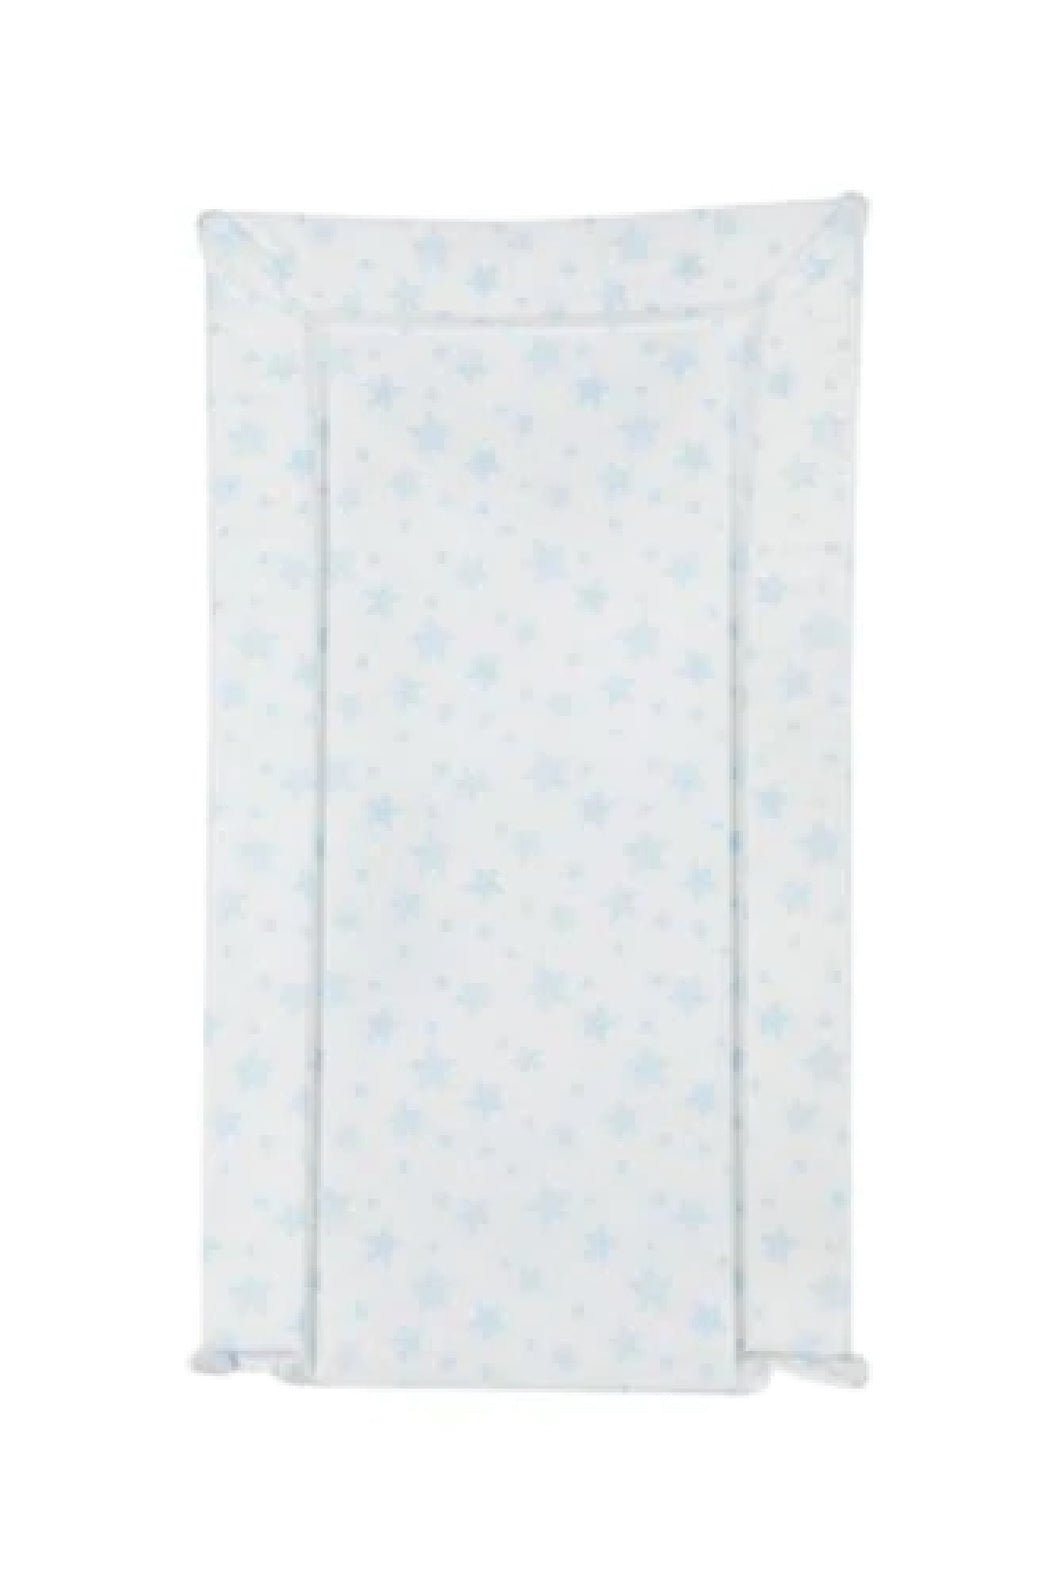 Mothercare Changing Mat Blue Star 1